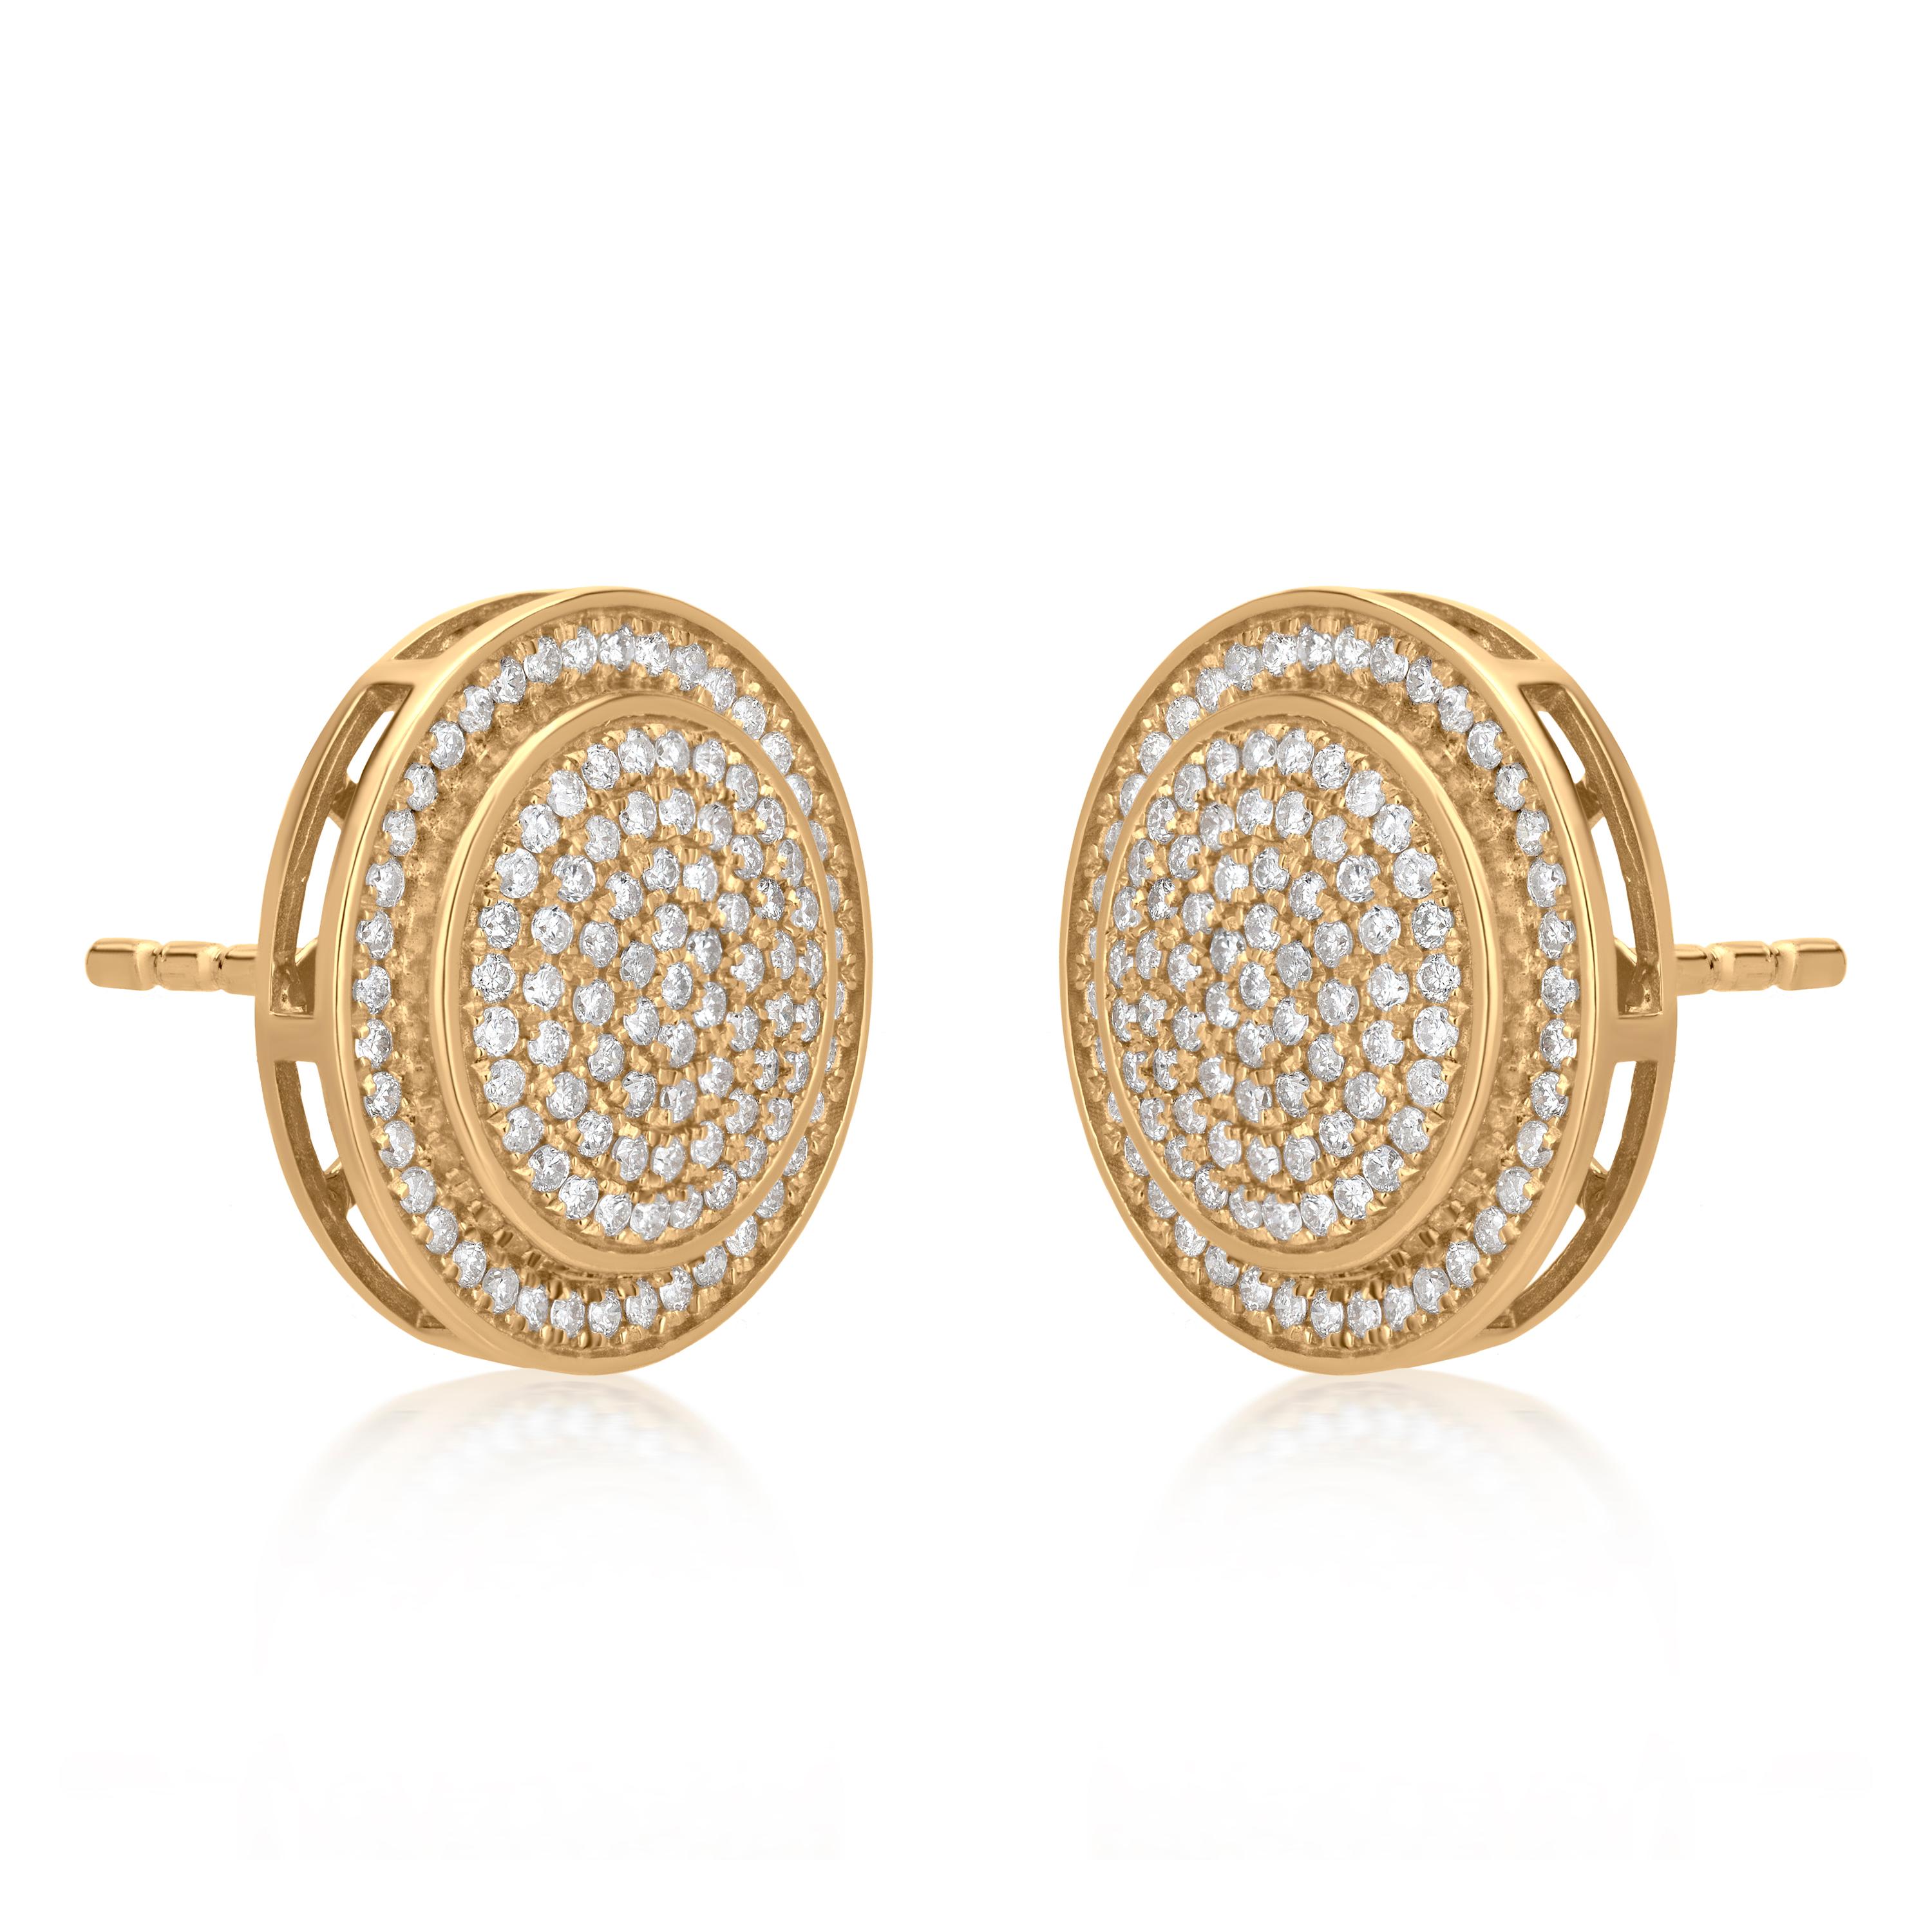 Illuminate your look with these Luxle eye-catching mosaic-style stud earrings. In a gorgeous circular motif, co-centric circles of .62 ct. t.w. round full-cut diamonds are mounted on 18k yellow gold to create this remarkable design. Screw back,